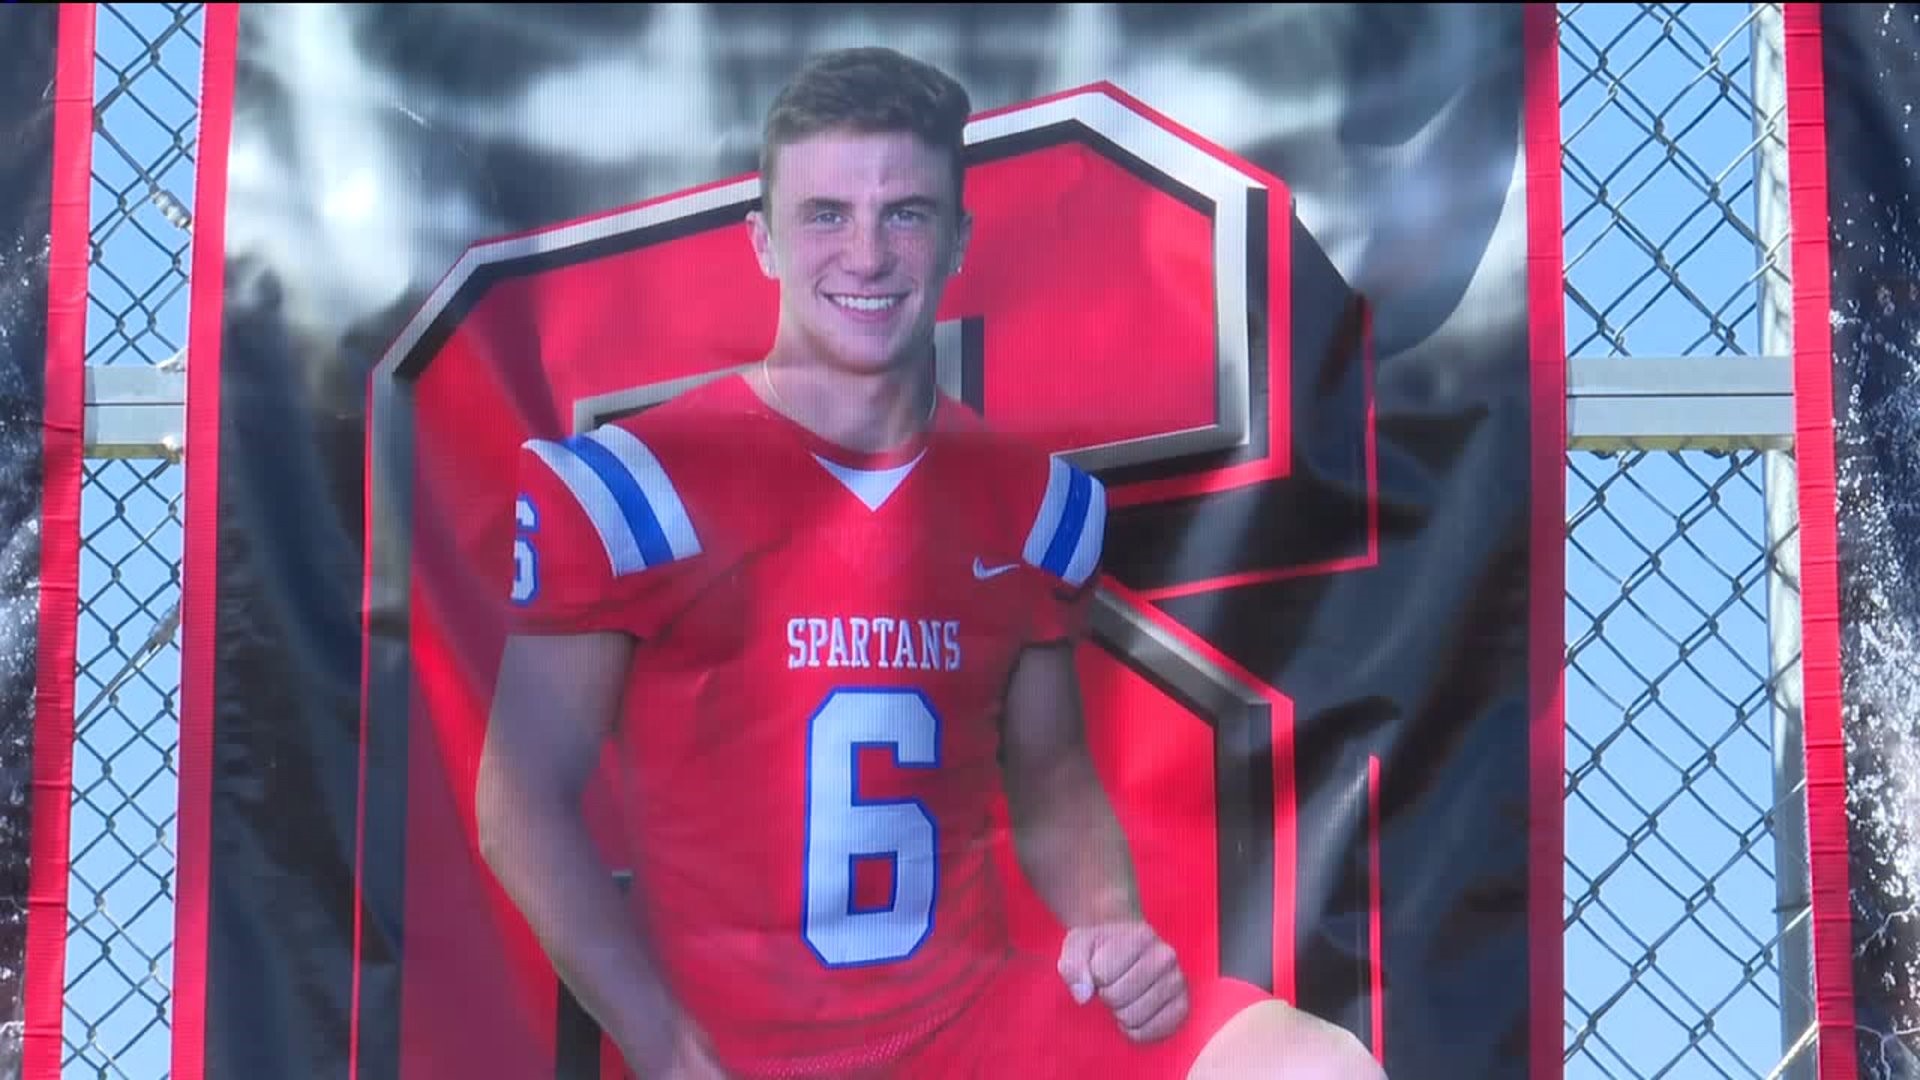 Communities in Schuylkill County Supporting Injured Football Player